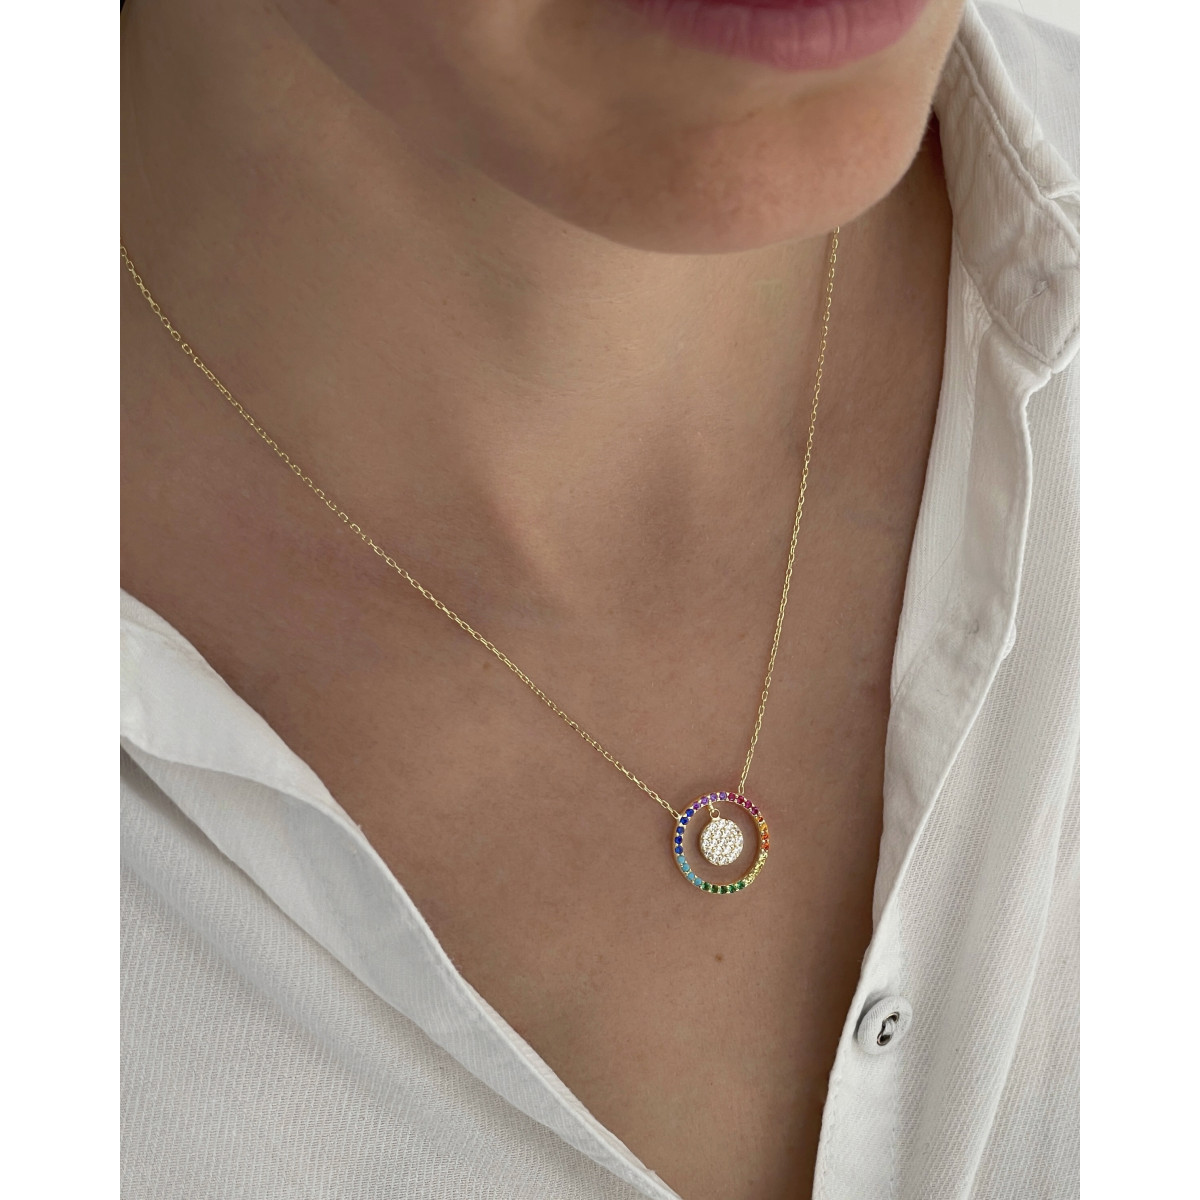 MULTICOLOR HOOP WITH MINI WHITE PAVE SPHERE INSIDE PENDANT NECKLACE